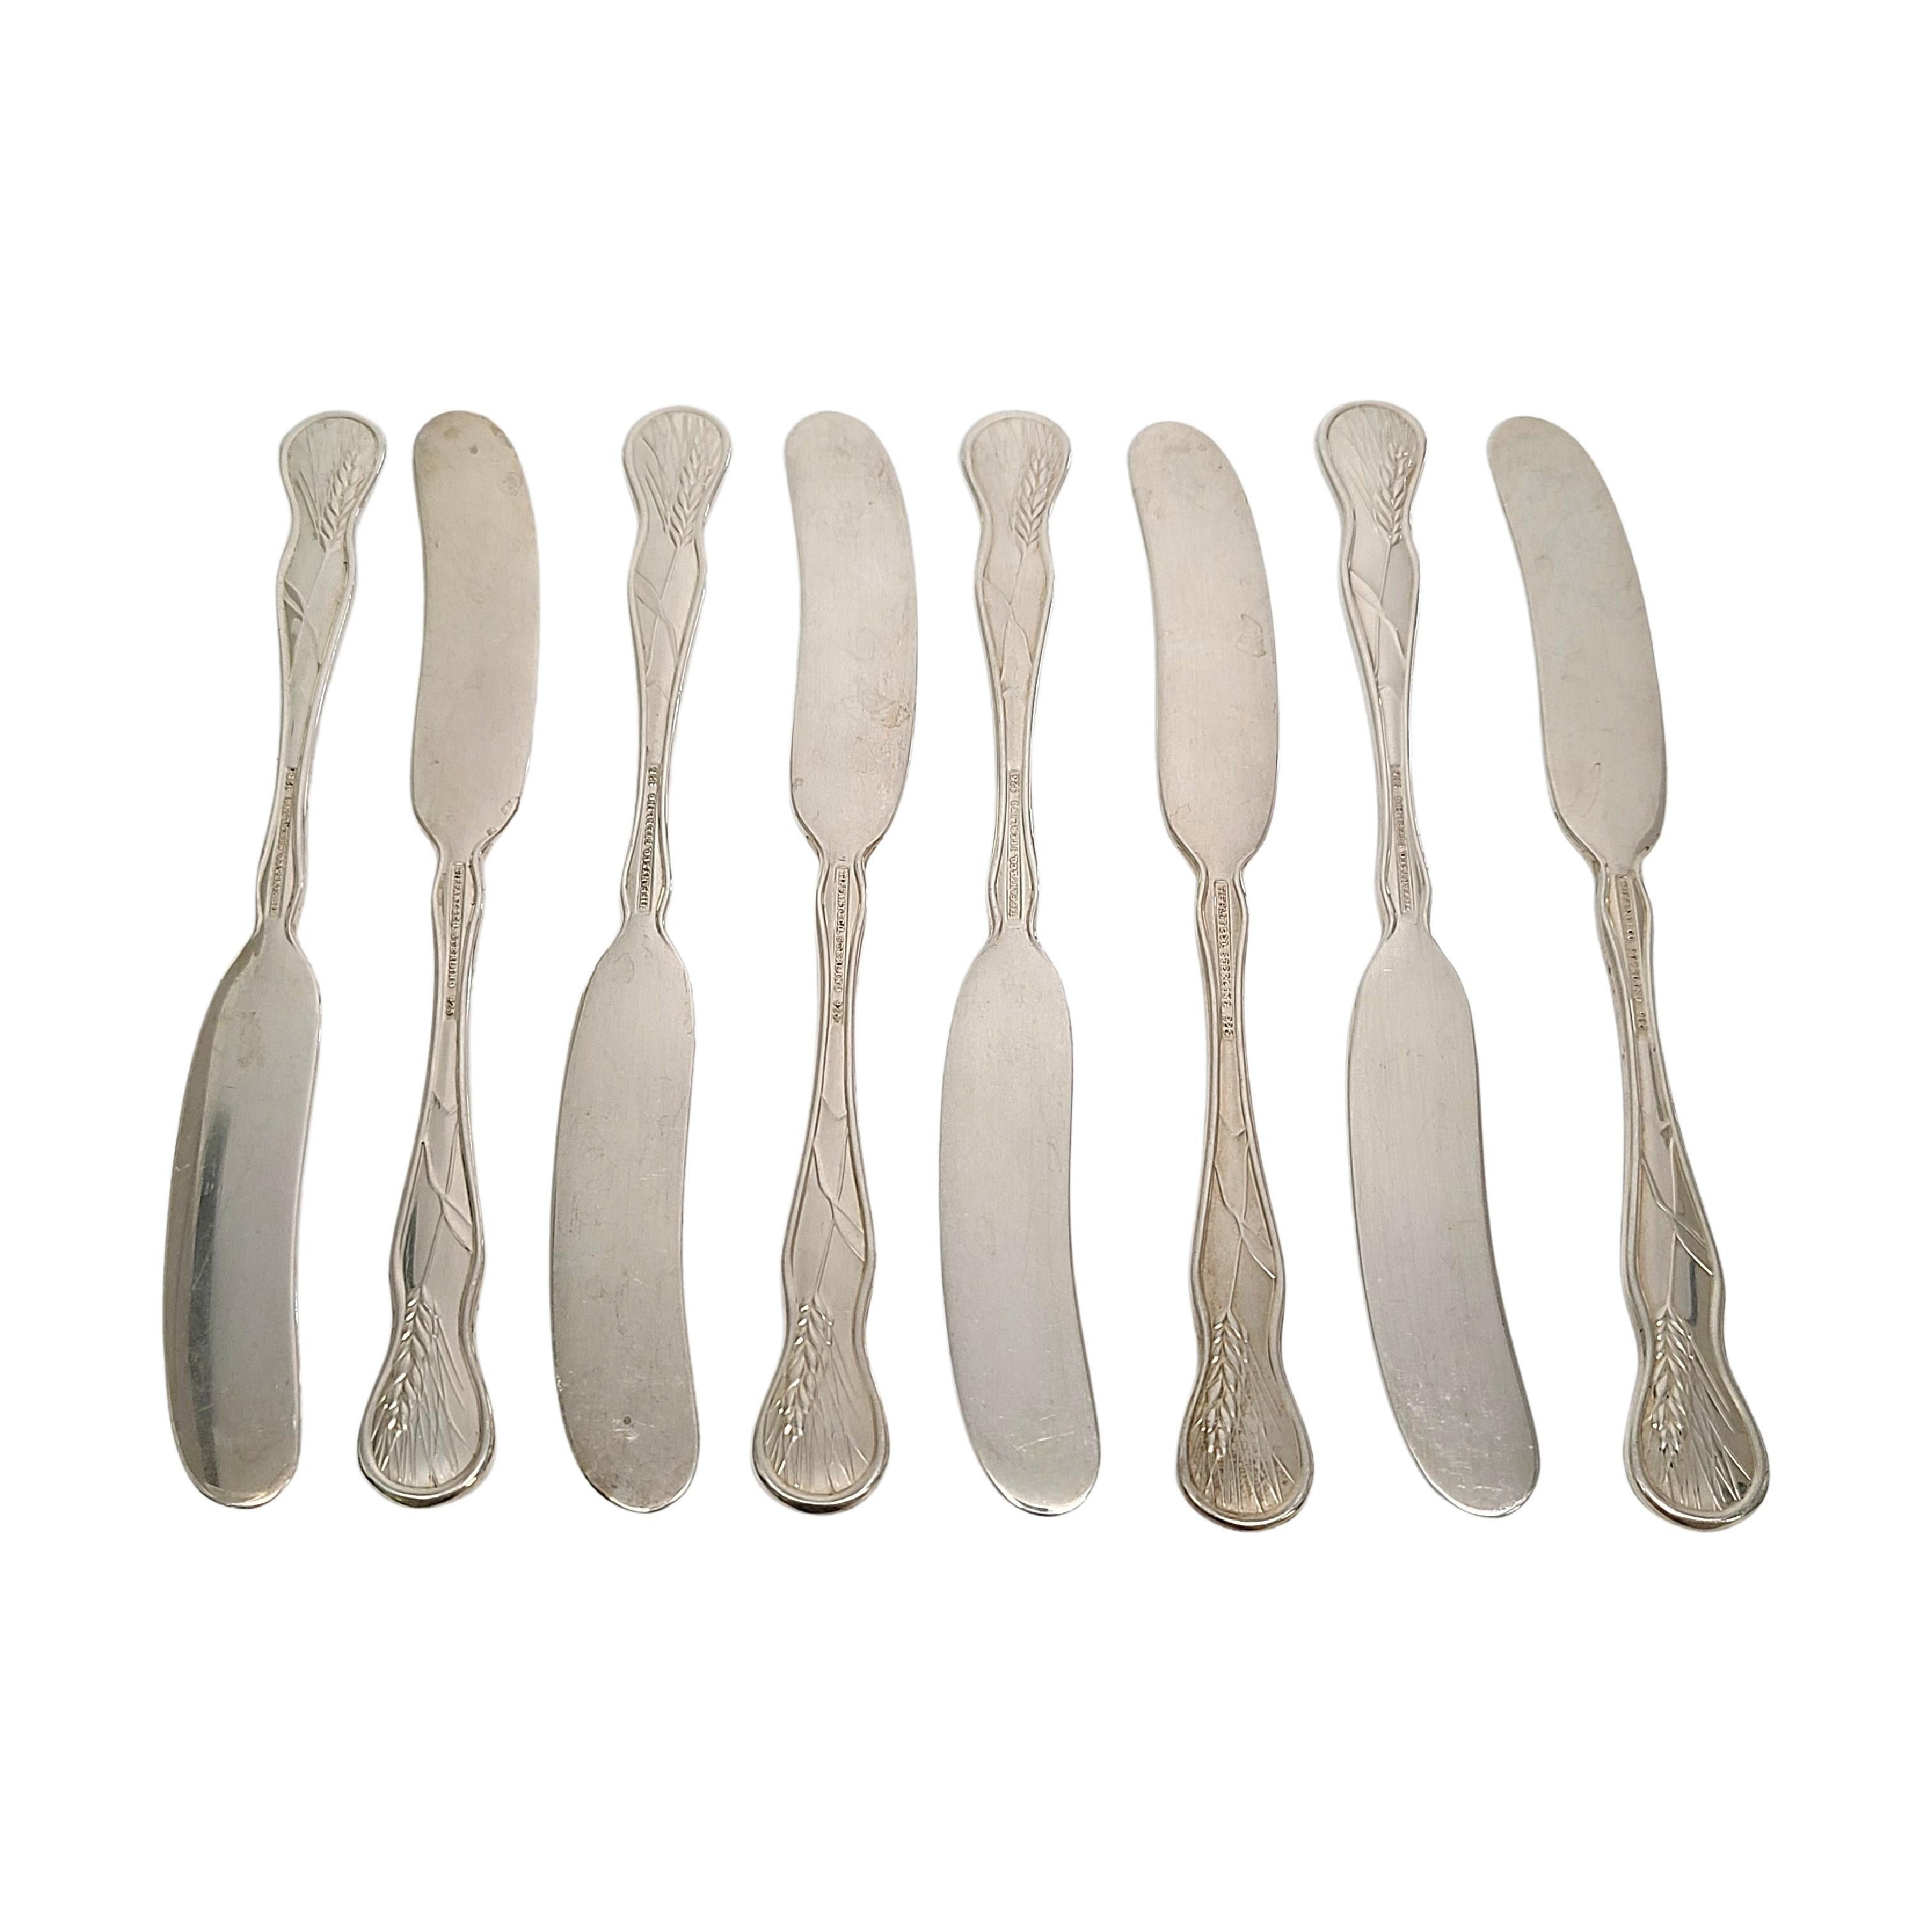 Set of 8 sterling silver butter spreader by Tiffany & Co in the American Garden pattern.

No monogram

American Garden is a multi-motif pattern inspired by the extensive botanical beauty of the United States. Does not include Tiffany box or